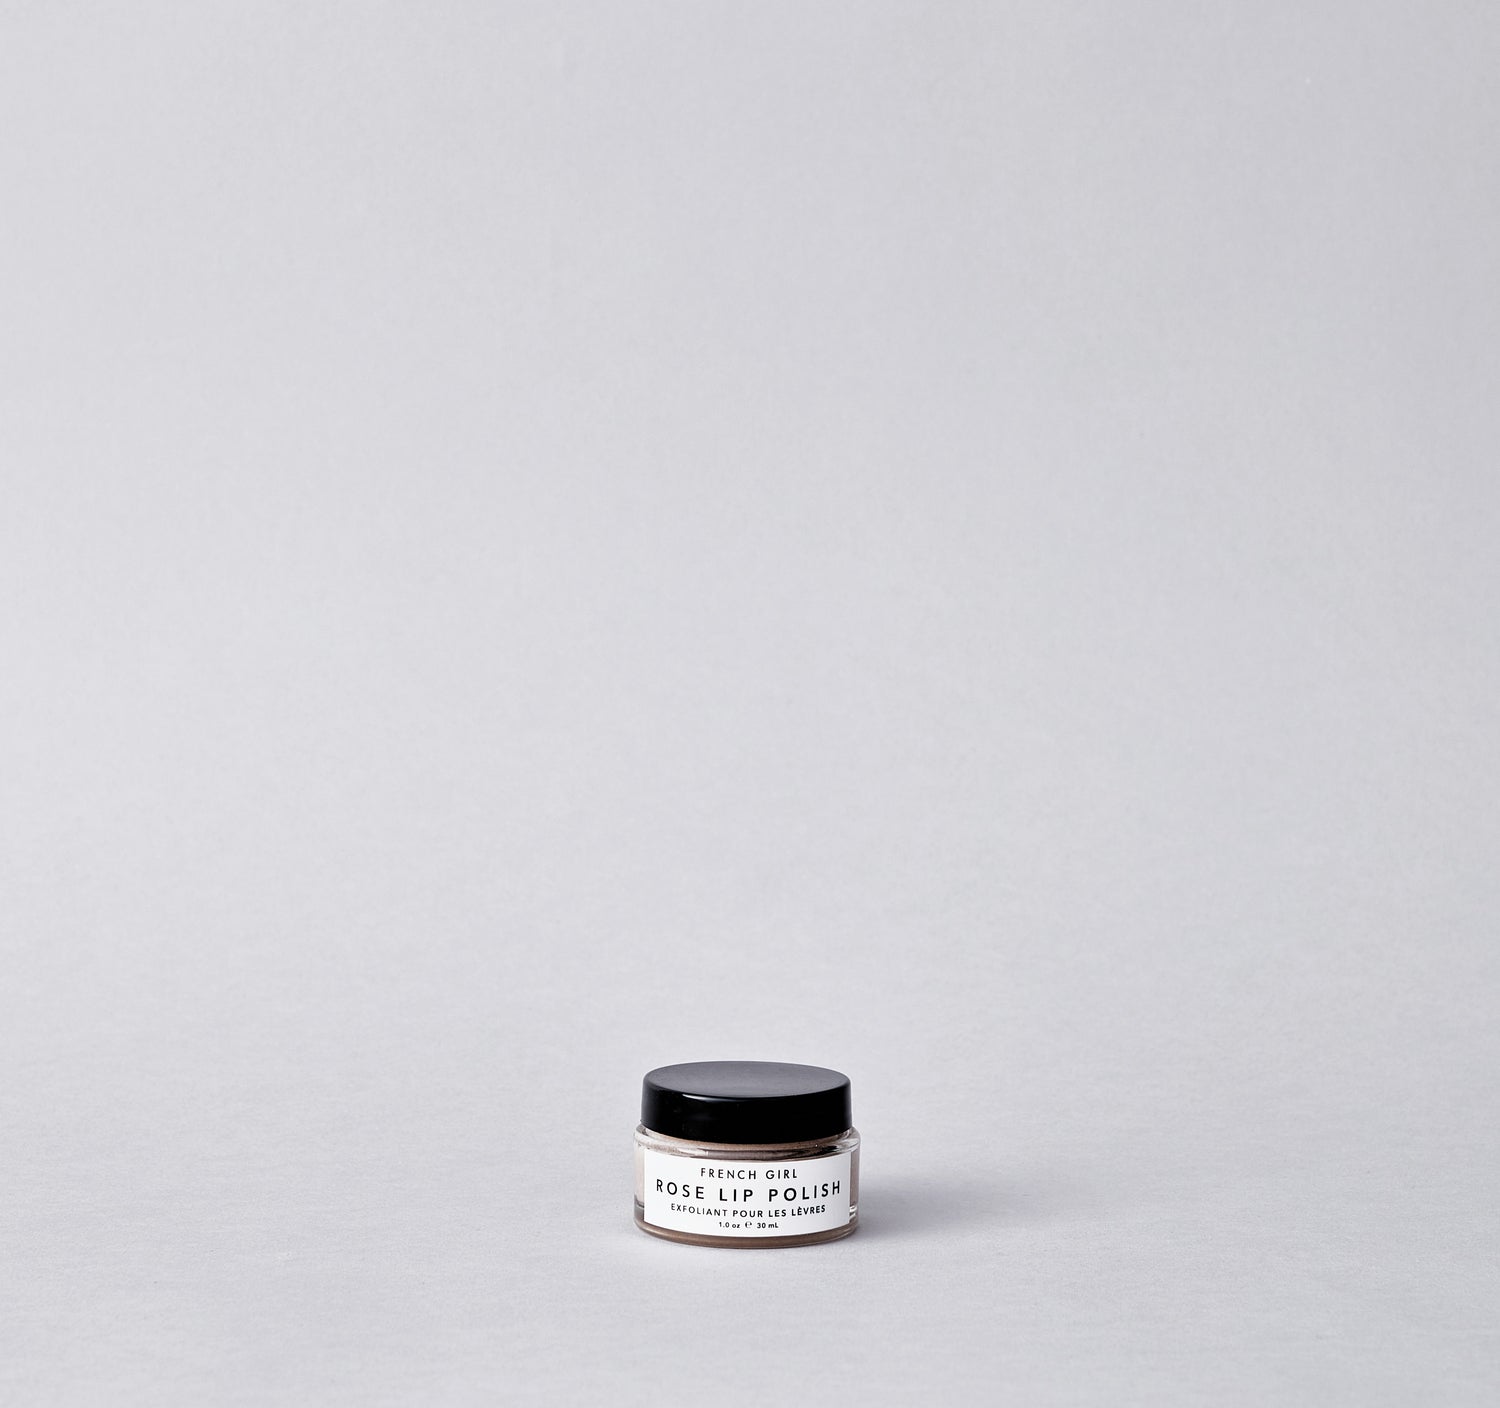 An invigorating rose and mint-infused sugar scrub formulated with nourishing butters to gently remove dry skin and leave lips supple and hydrated.